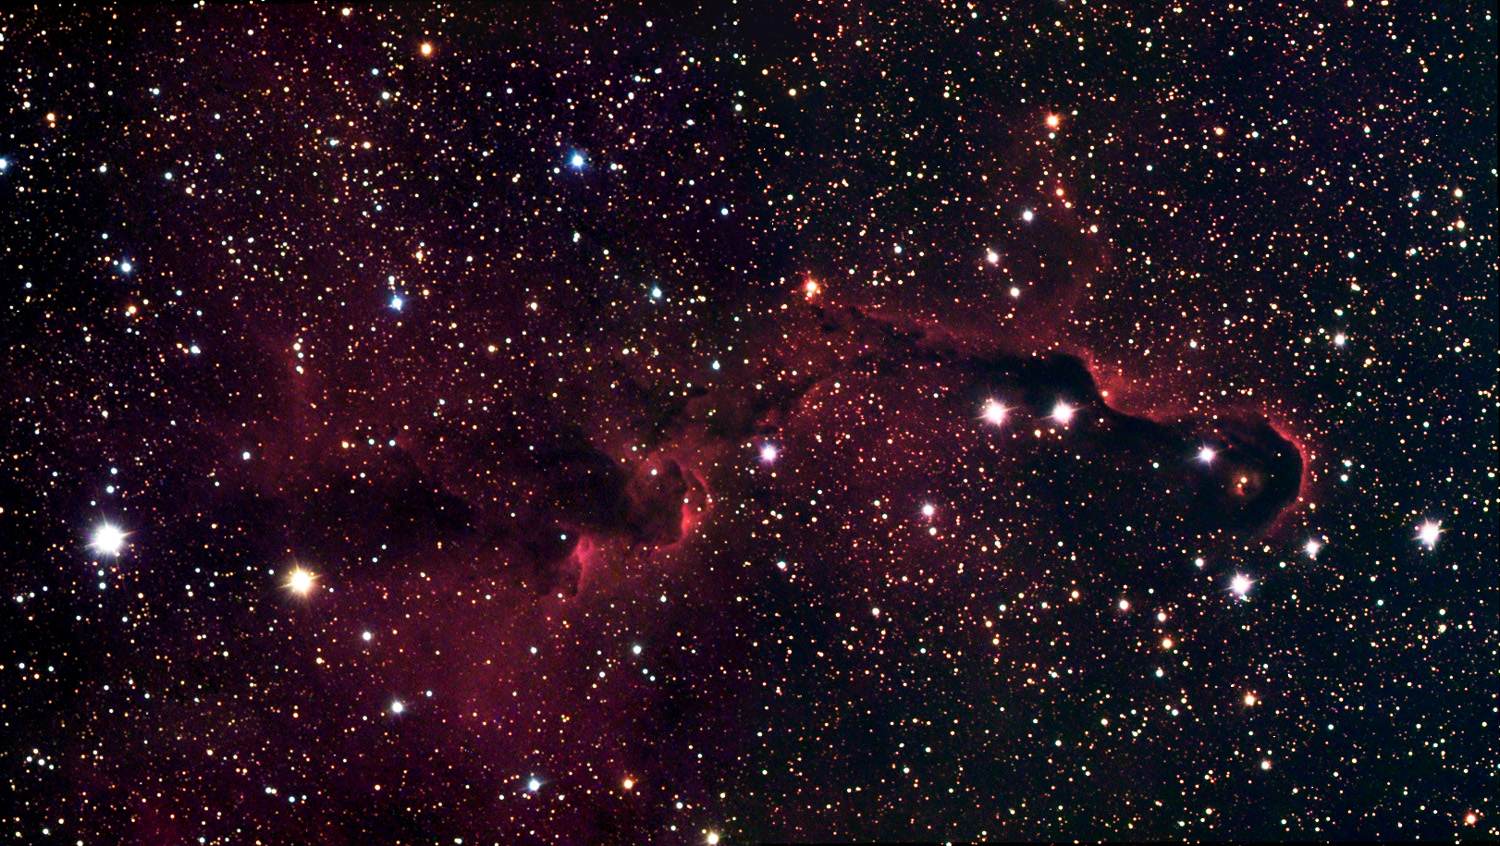 The Elephant s Trunk in IC 1396